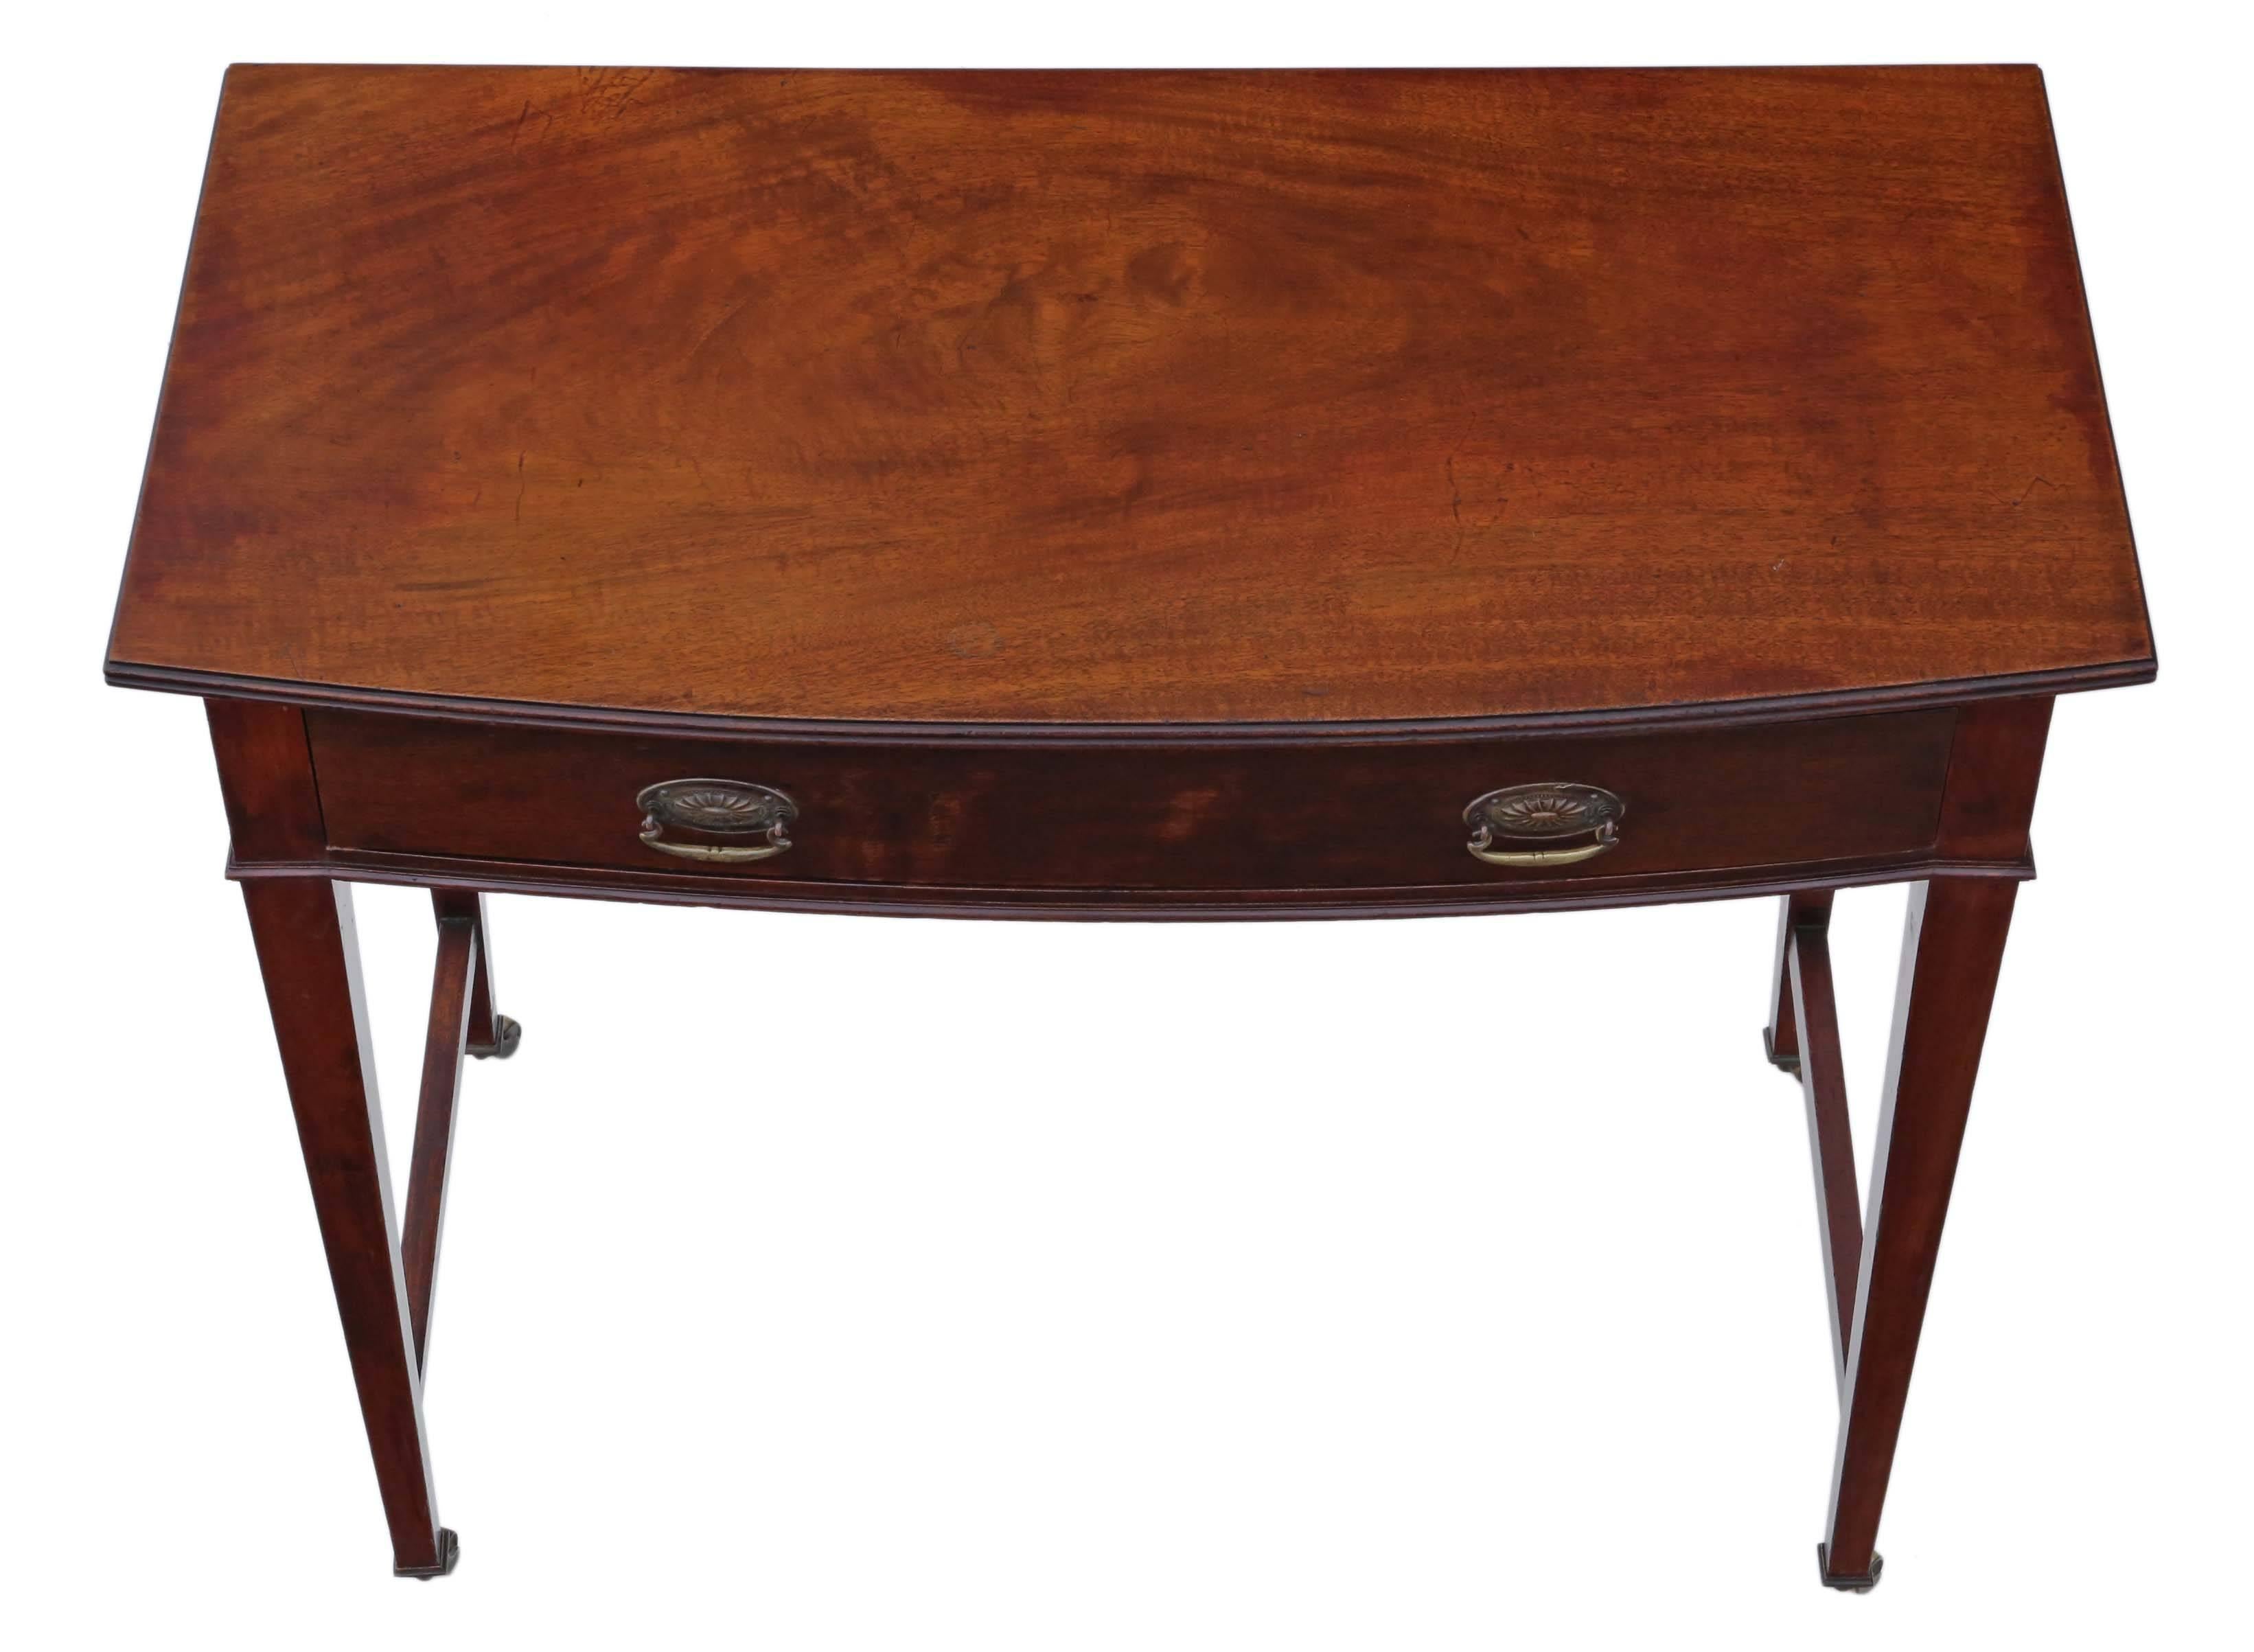 Antique Victorian, circa 1900 bow front mahogany writing table desk dressing.

Fabulous shape, proportions, color, age and patina. No woodworm.

The table is solid, with no loose joints and the mahogany lined drawer slides freely. Period brass